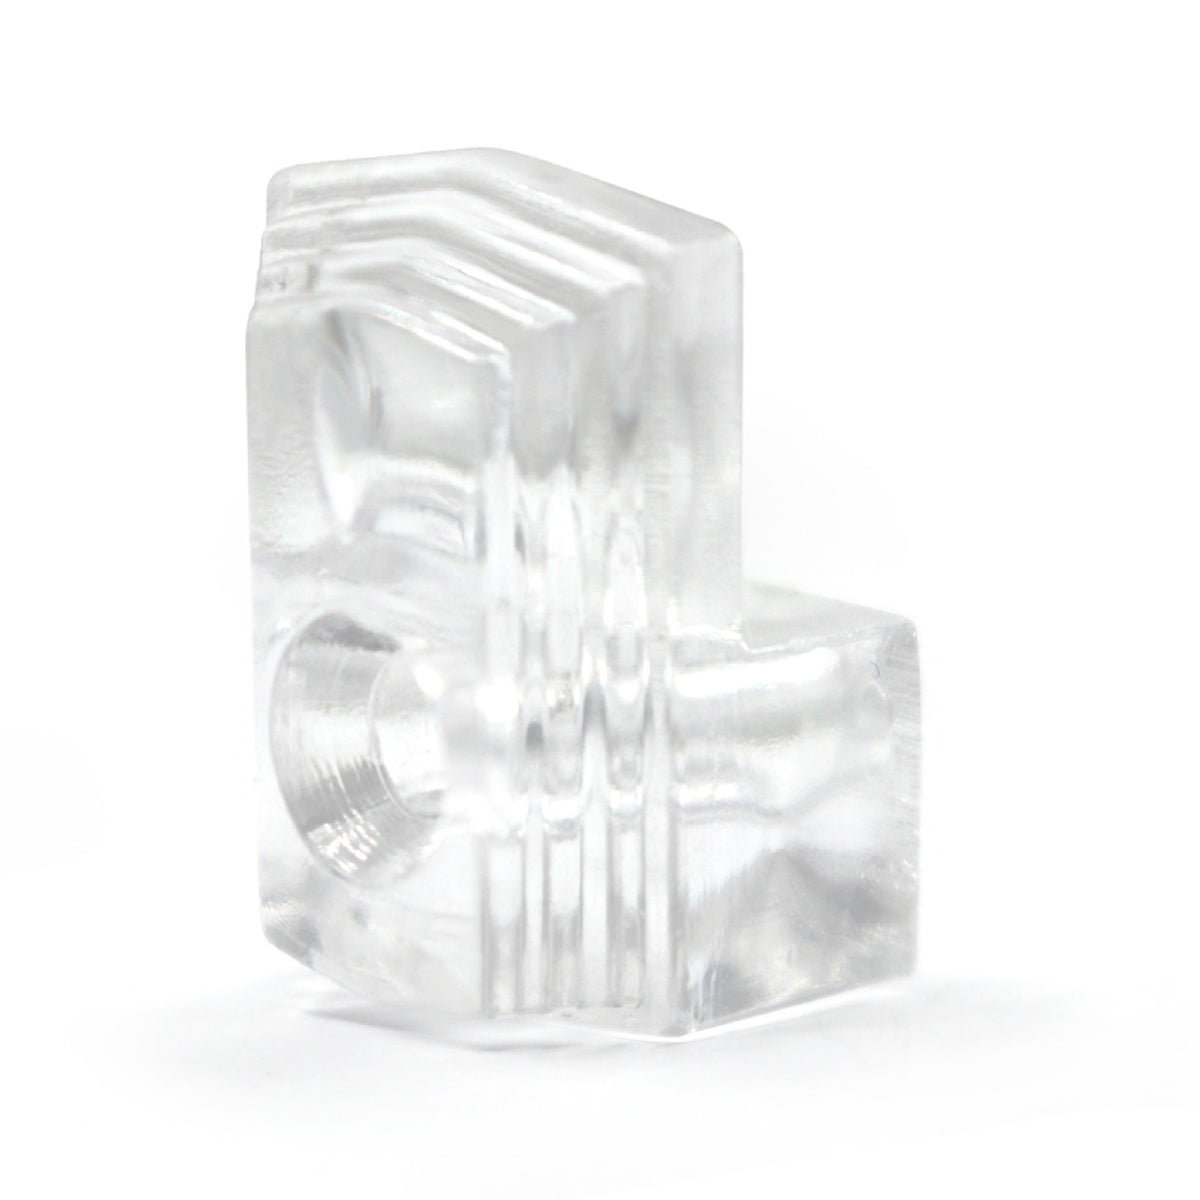 Clear Mirror Clips For Frameless Mirrors - Holds 1/4 Thick